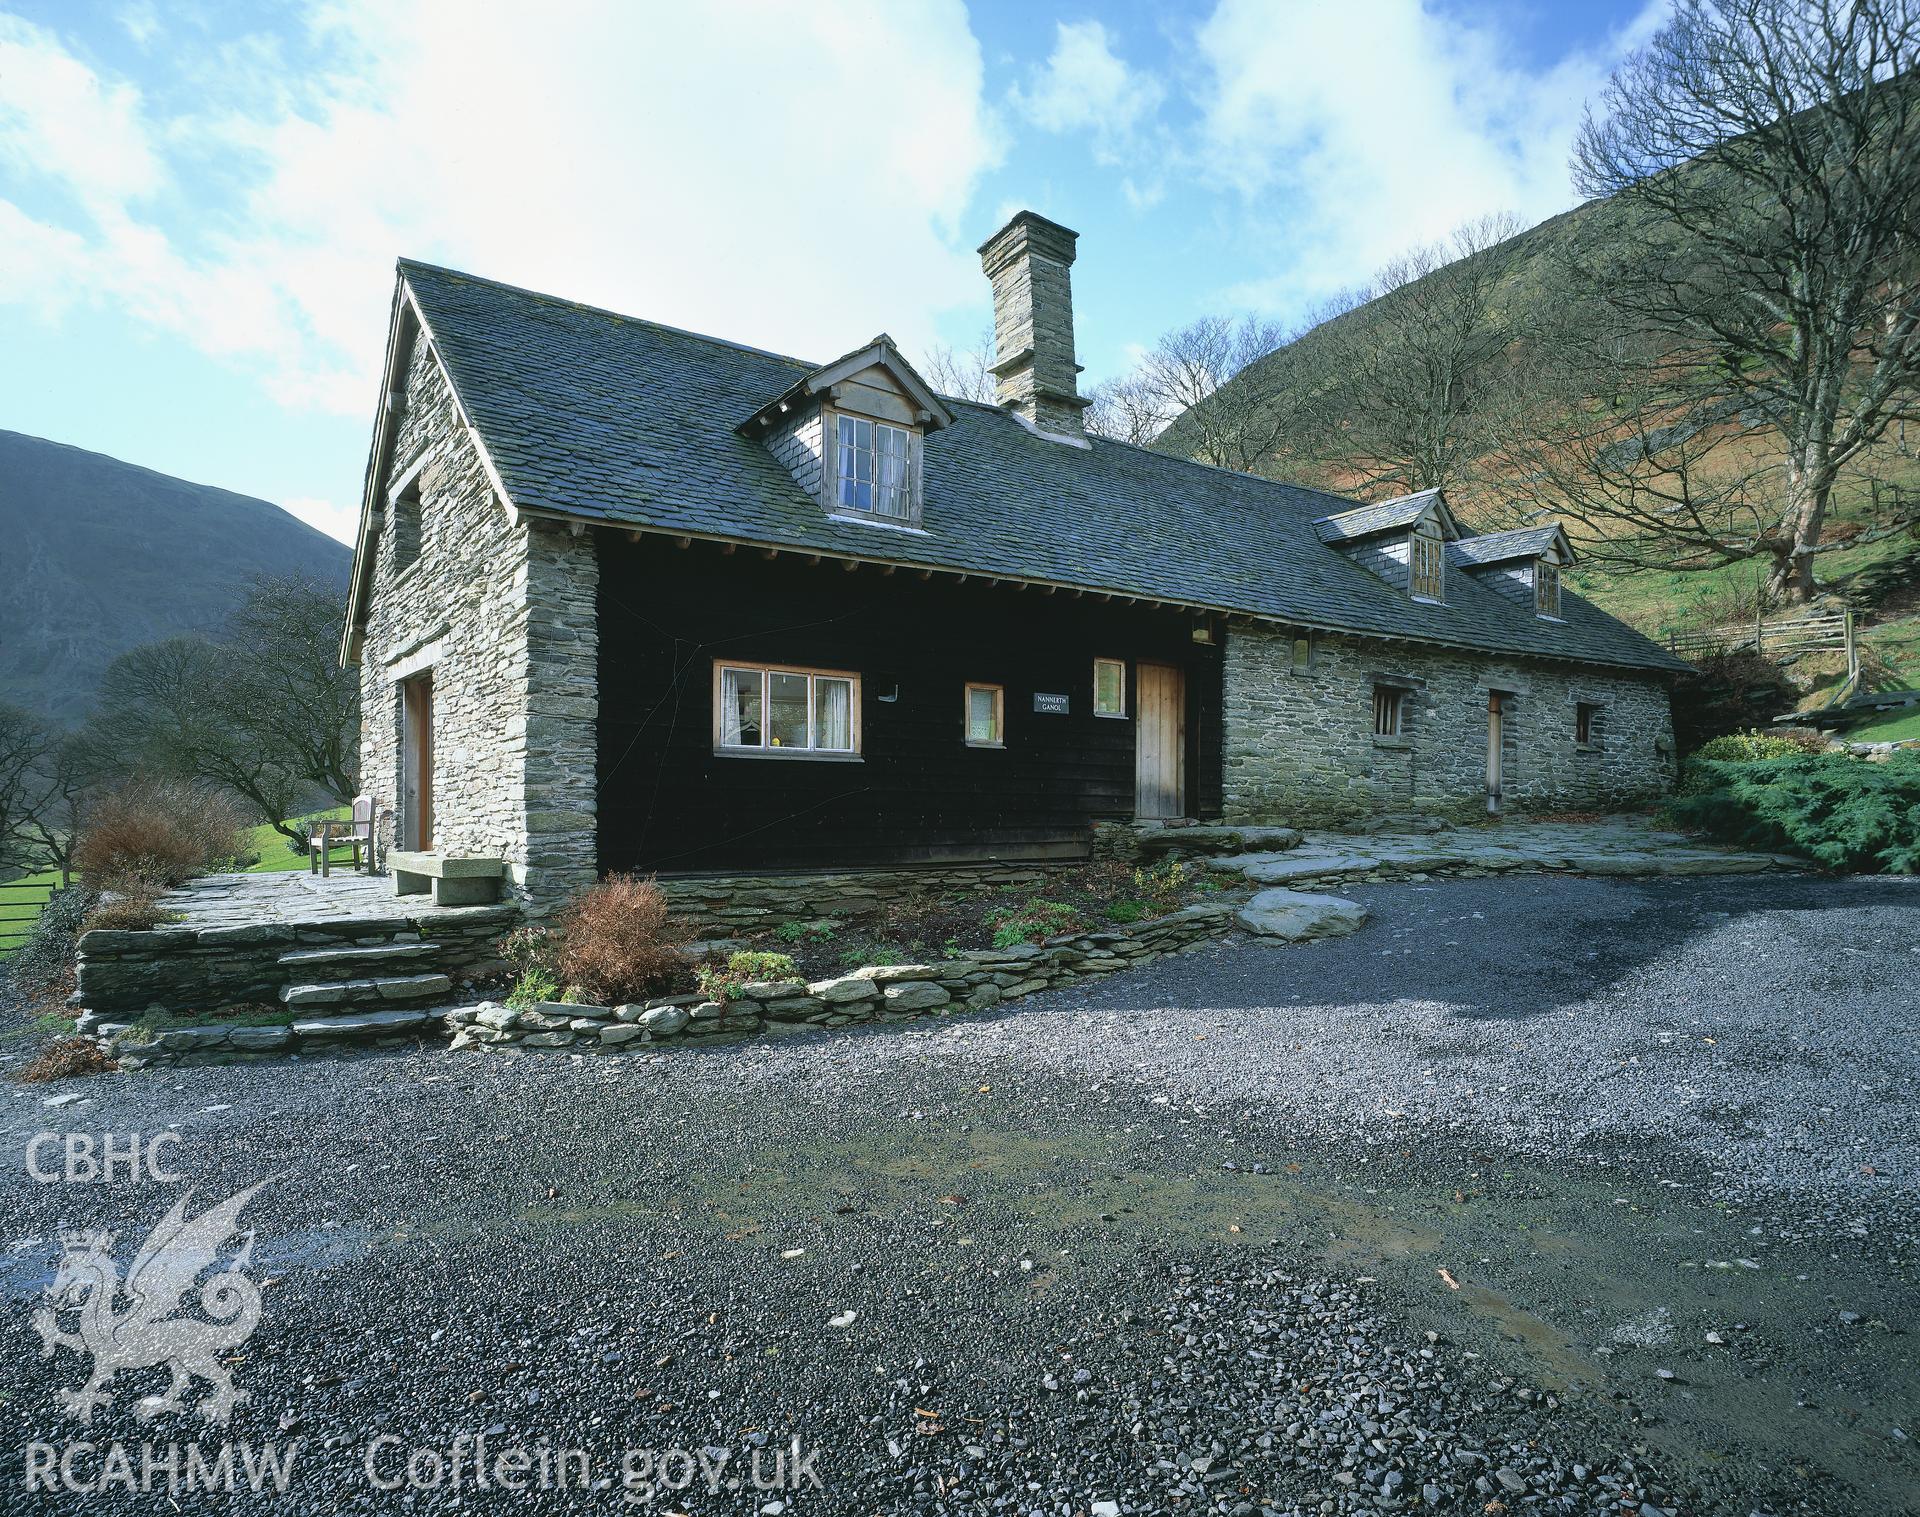 RCAHMW colour transparency showing view of Nannerth Ganol, Rhayader